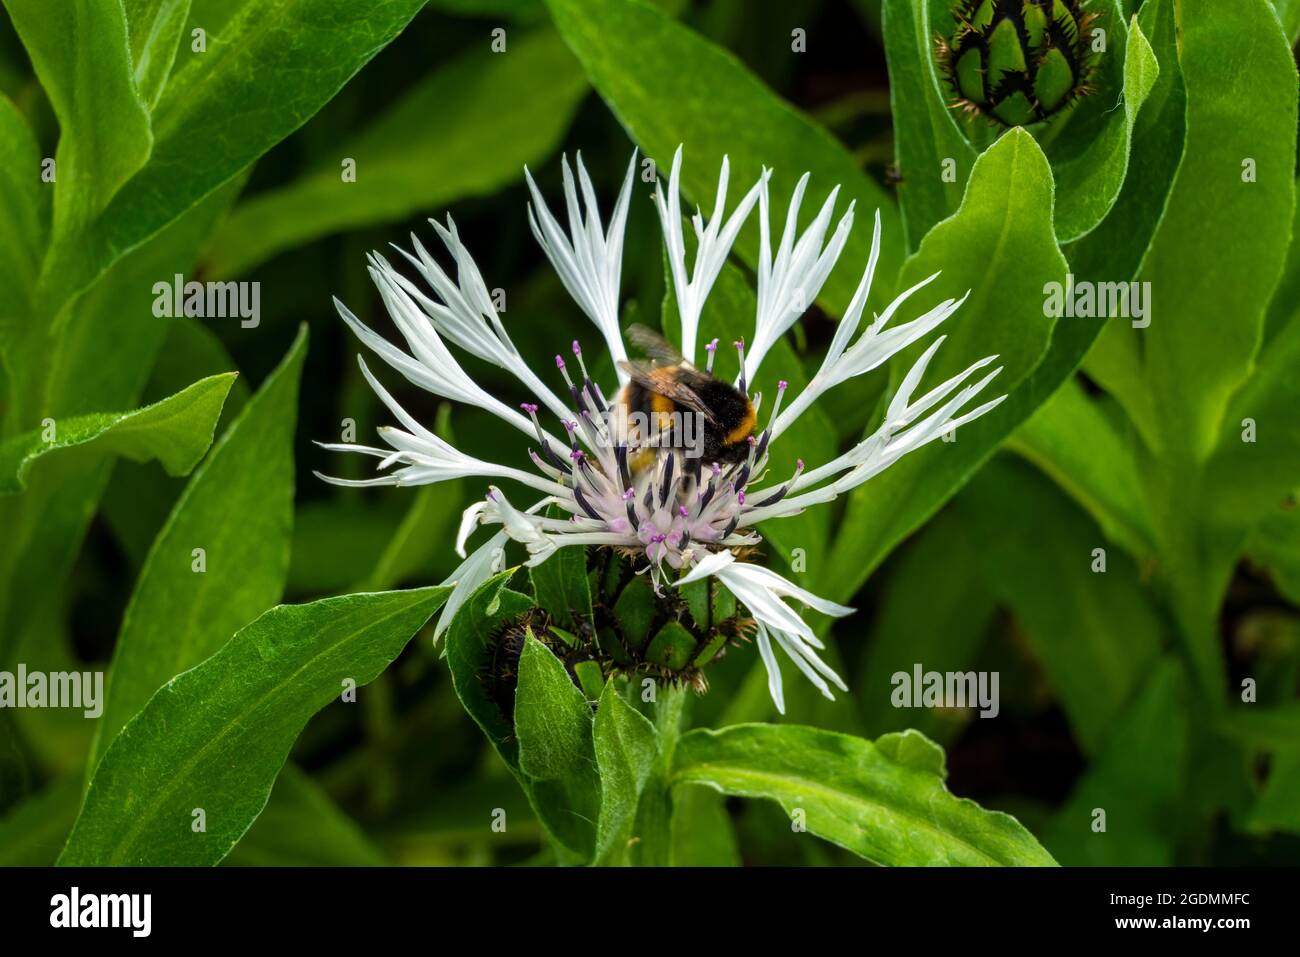 Centaurea montana 'Alaba' a summer flowering plant with a ragged petalled summertime flower commonly known as white perennial cornflower with bumblebe Stock Photo